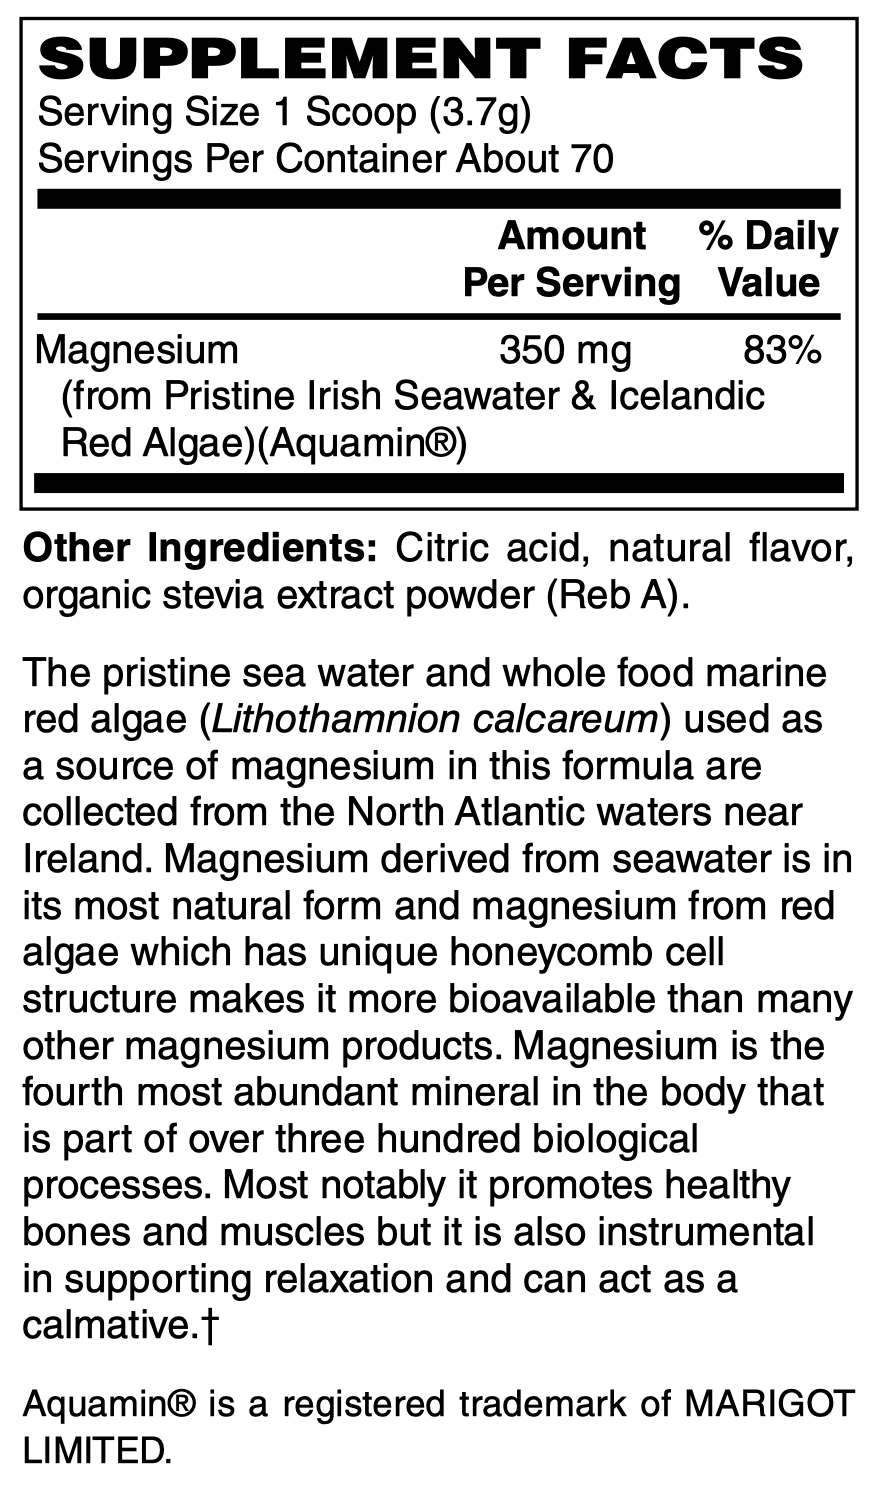 Betsy_s Basics Whole Food Magnesium Powder Supplement Facts